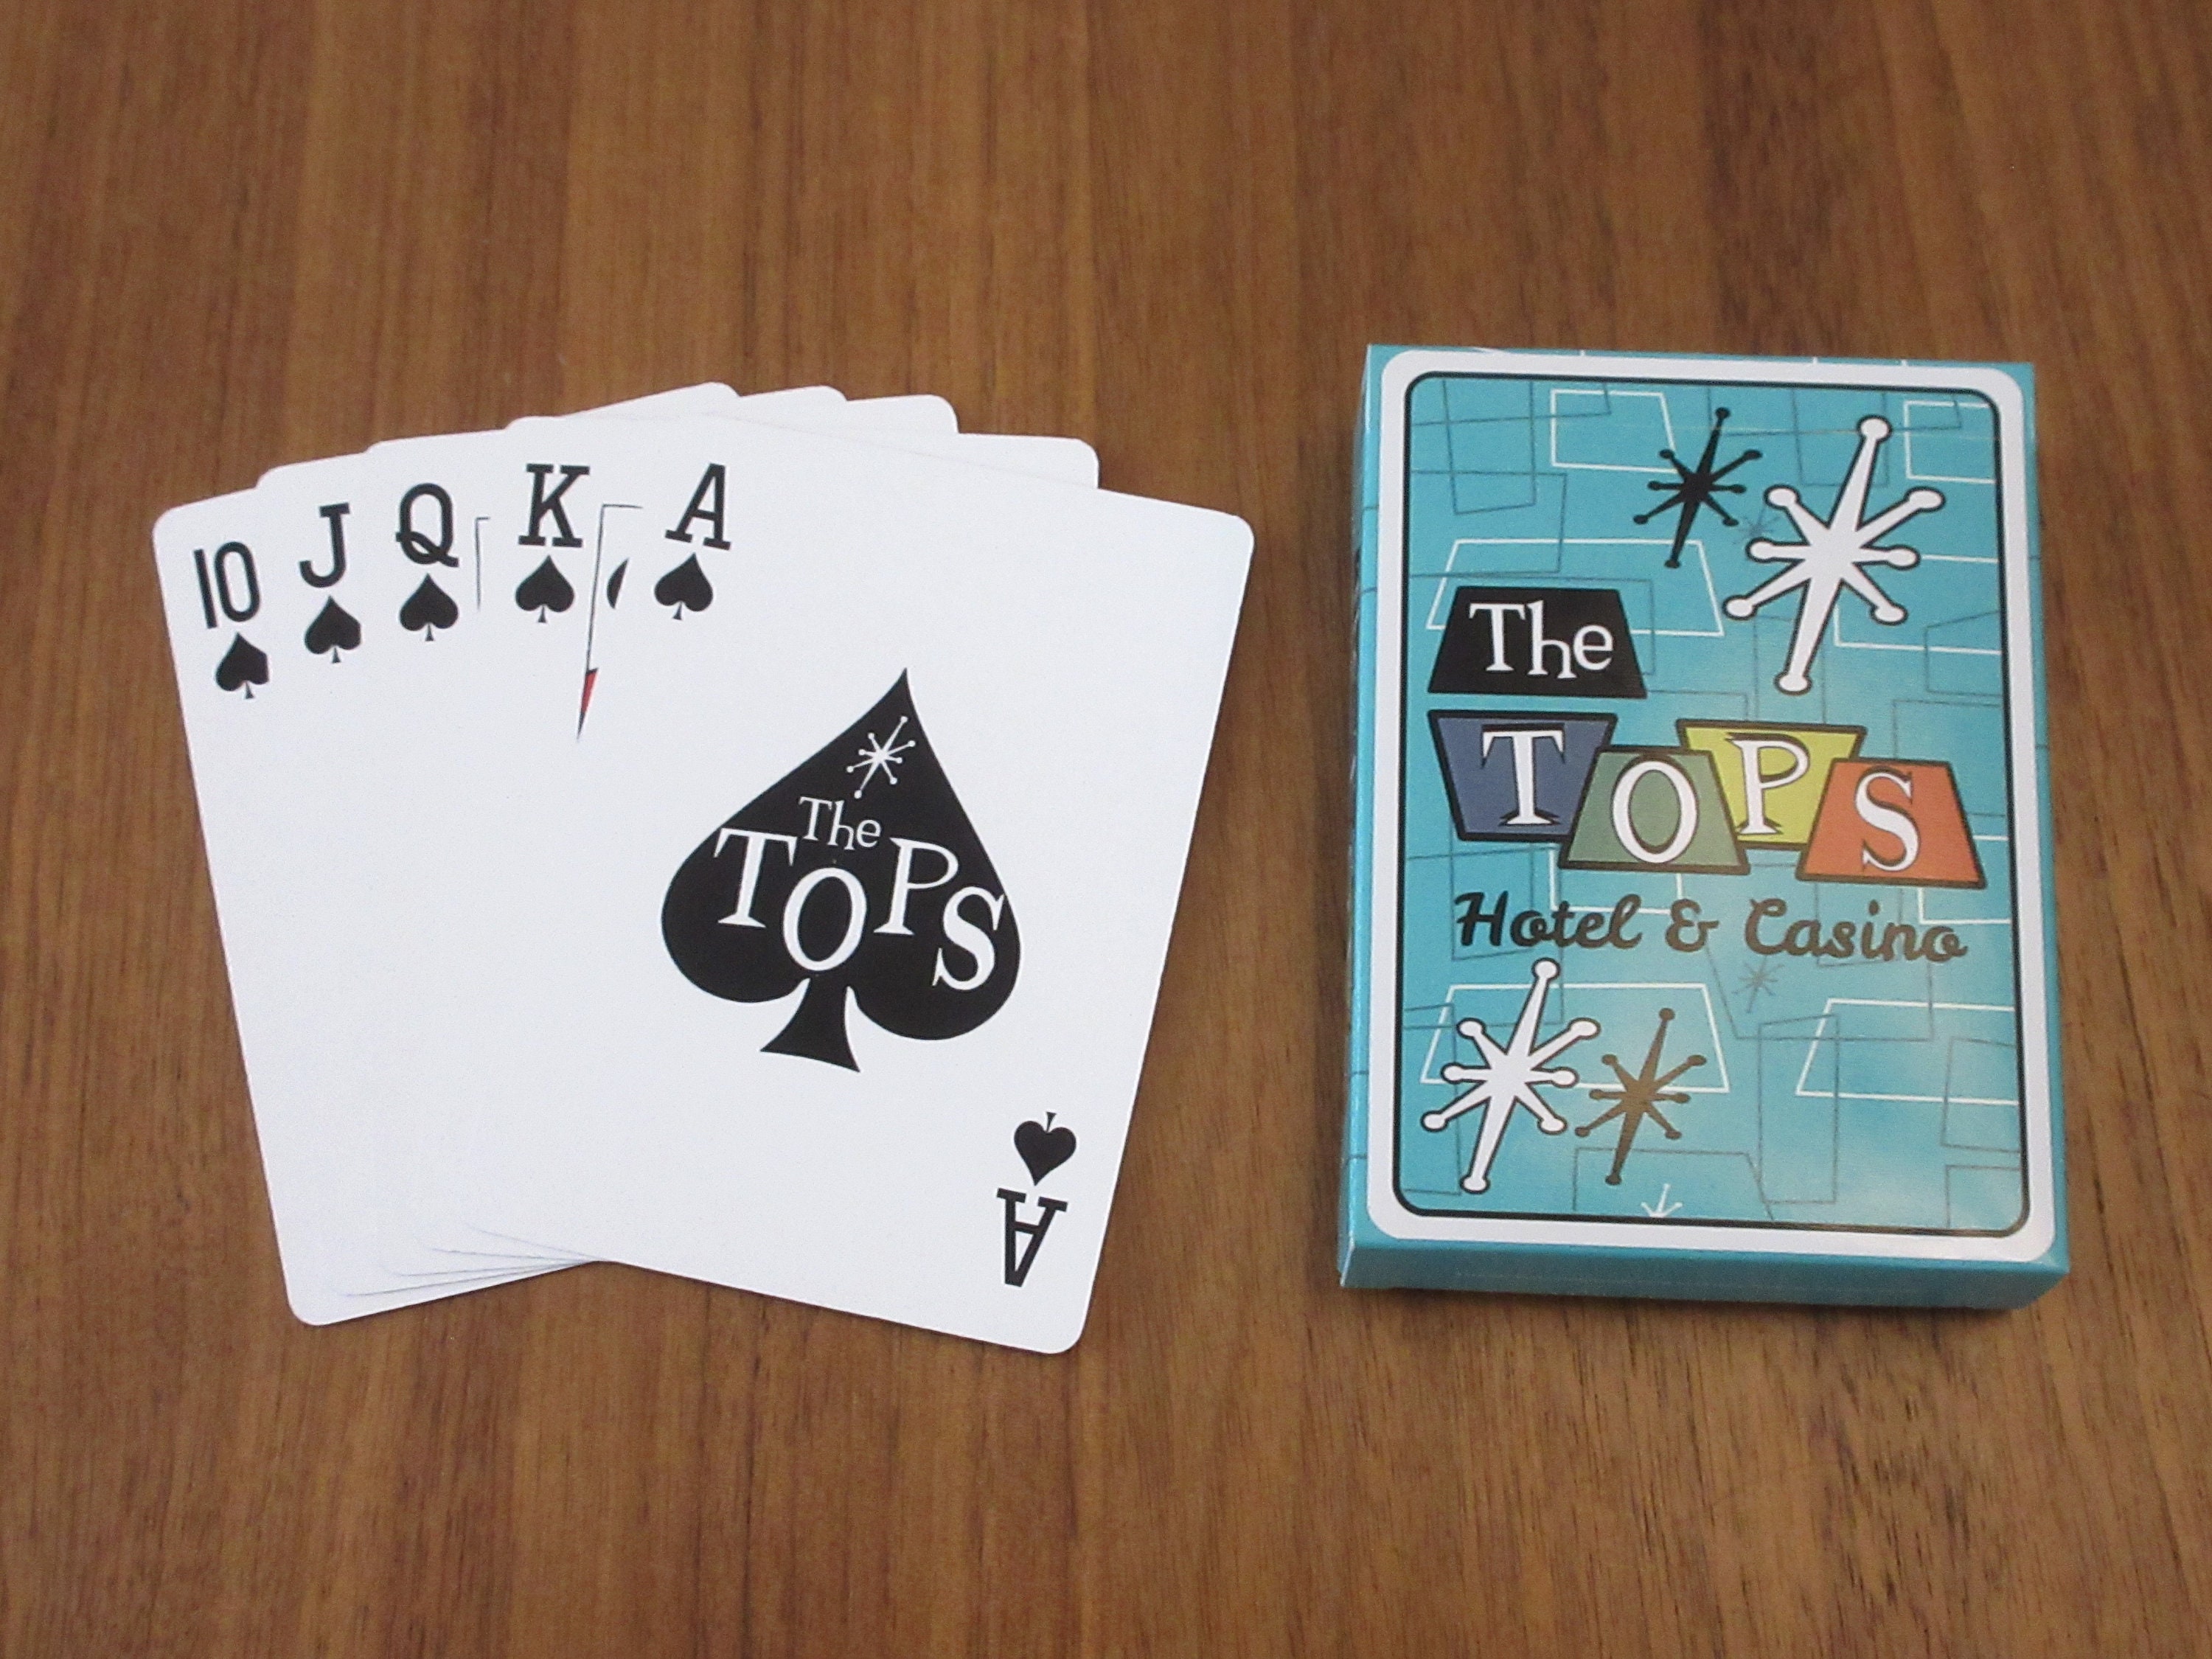  Deck of Playing Cards Used in a Las Vegas Casino